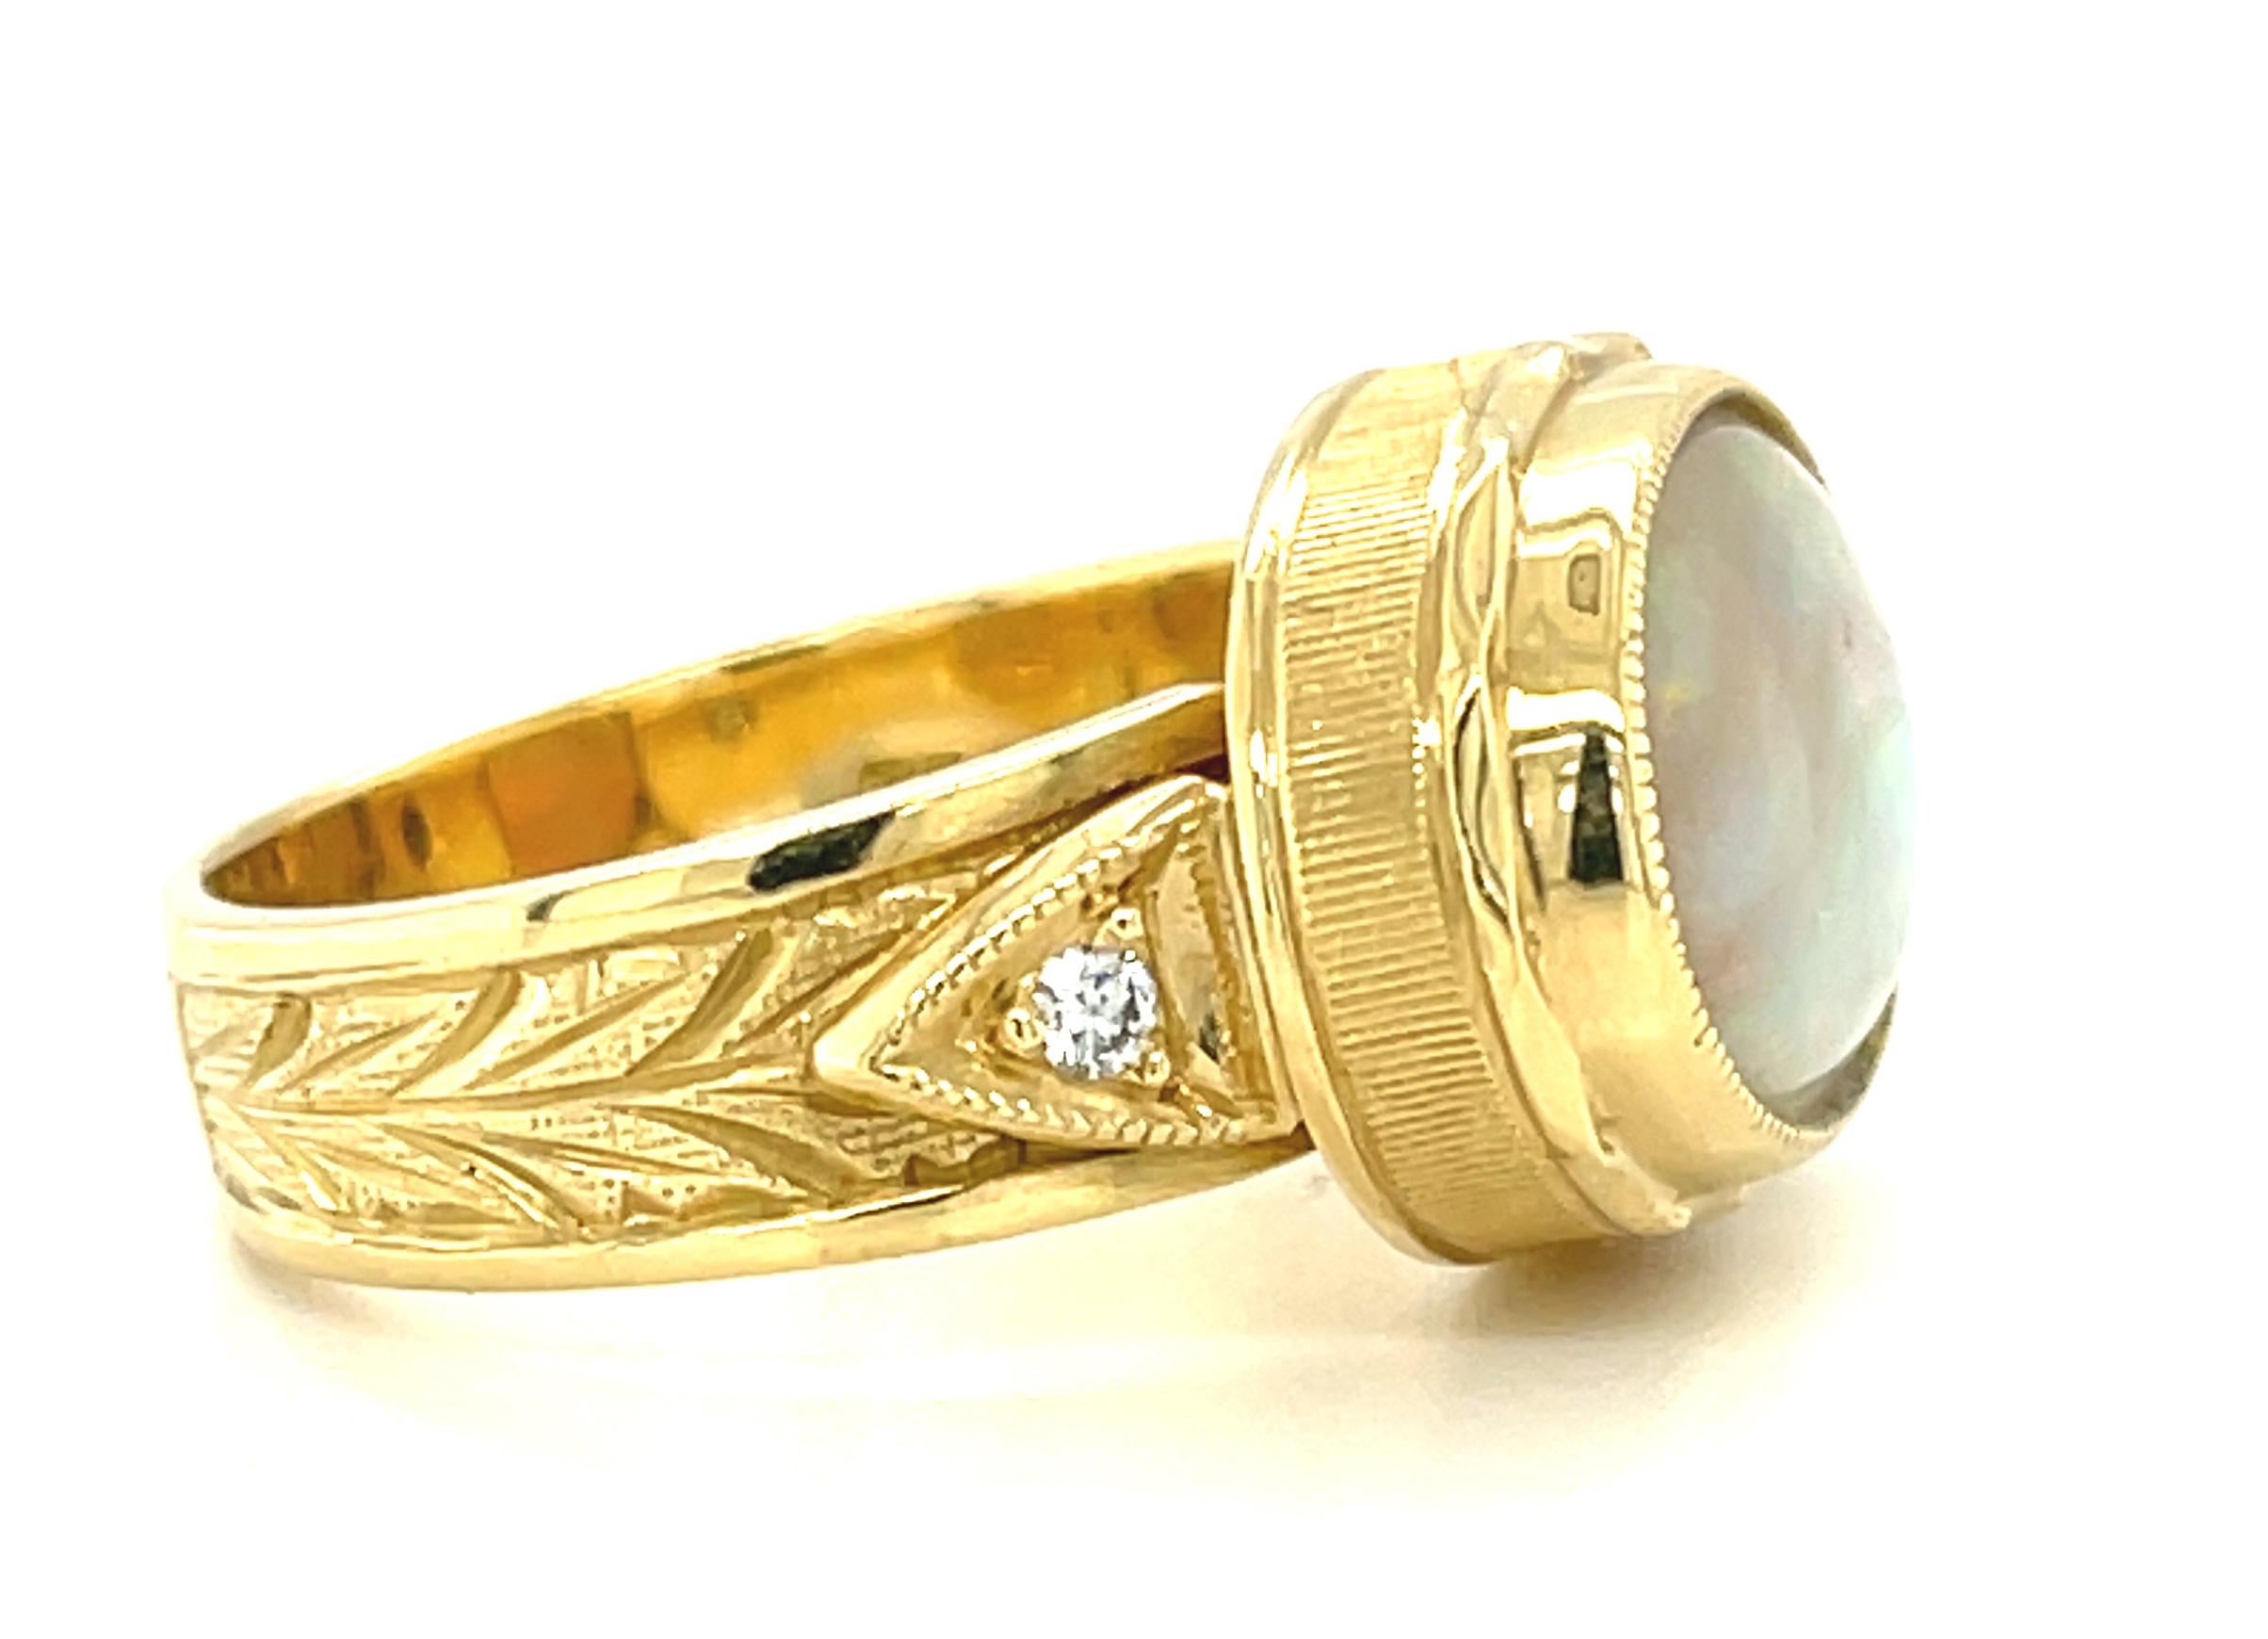 Cabochon 3.00 Carat Australian Opal and Diamond Band Ring in 18k Yellow Gold